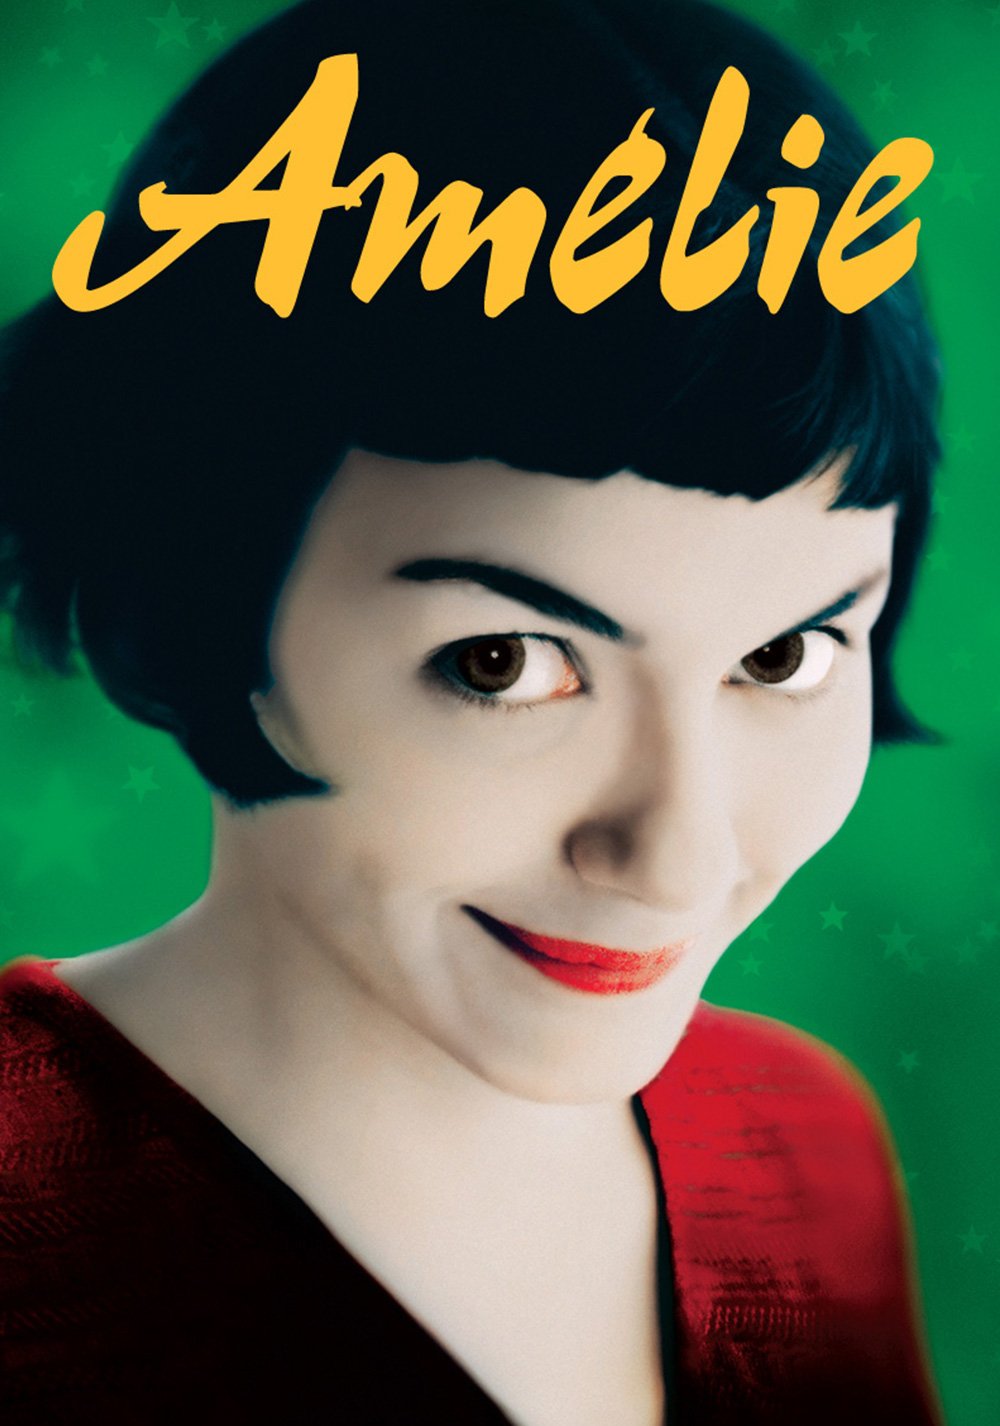 amelie-movie-poster-id-71748-image-abyss